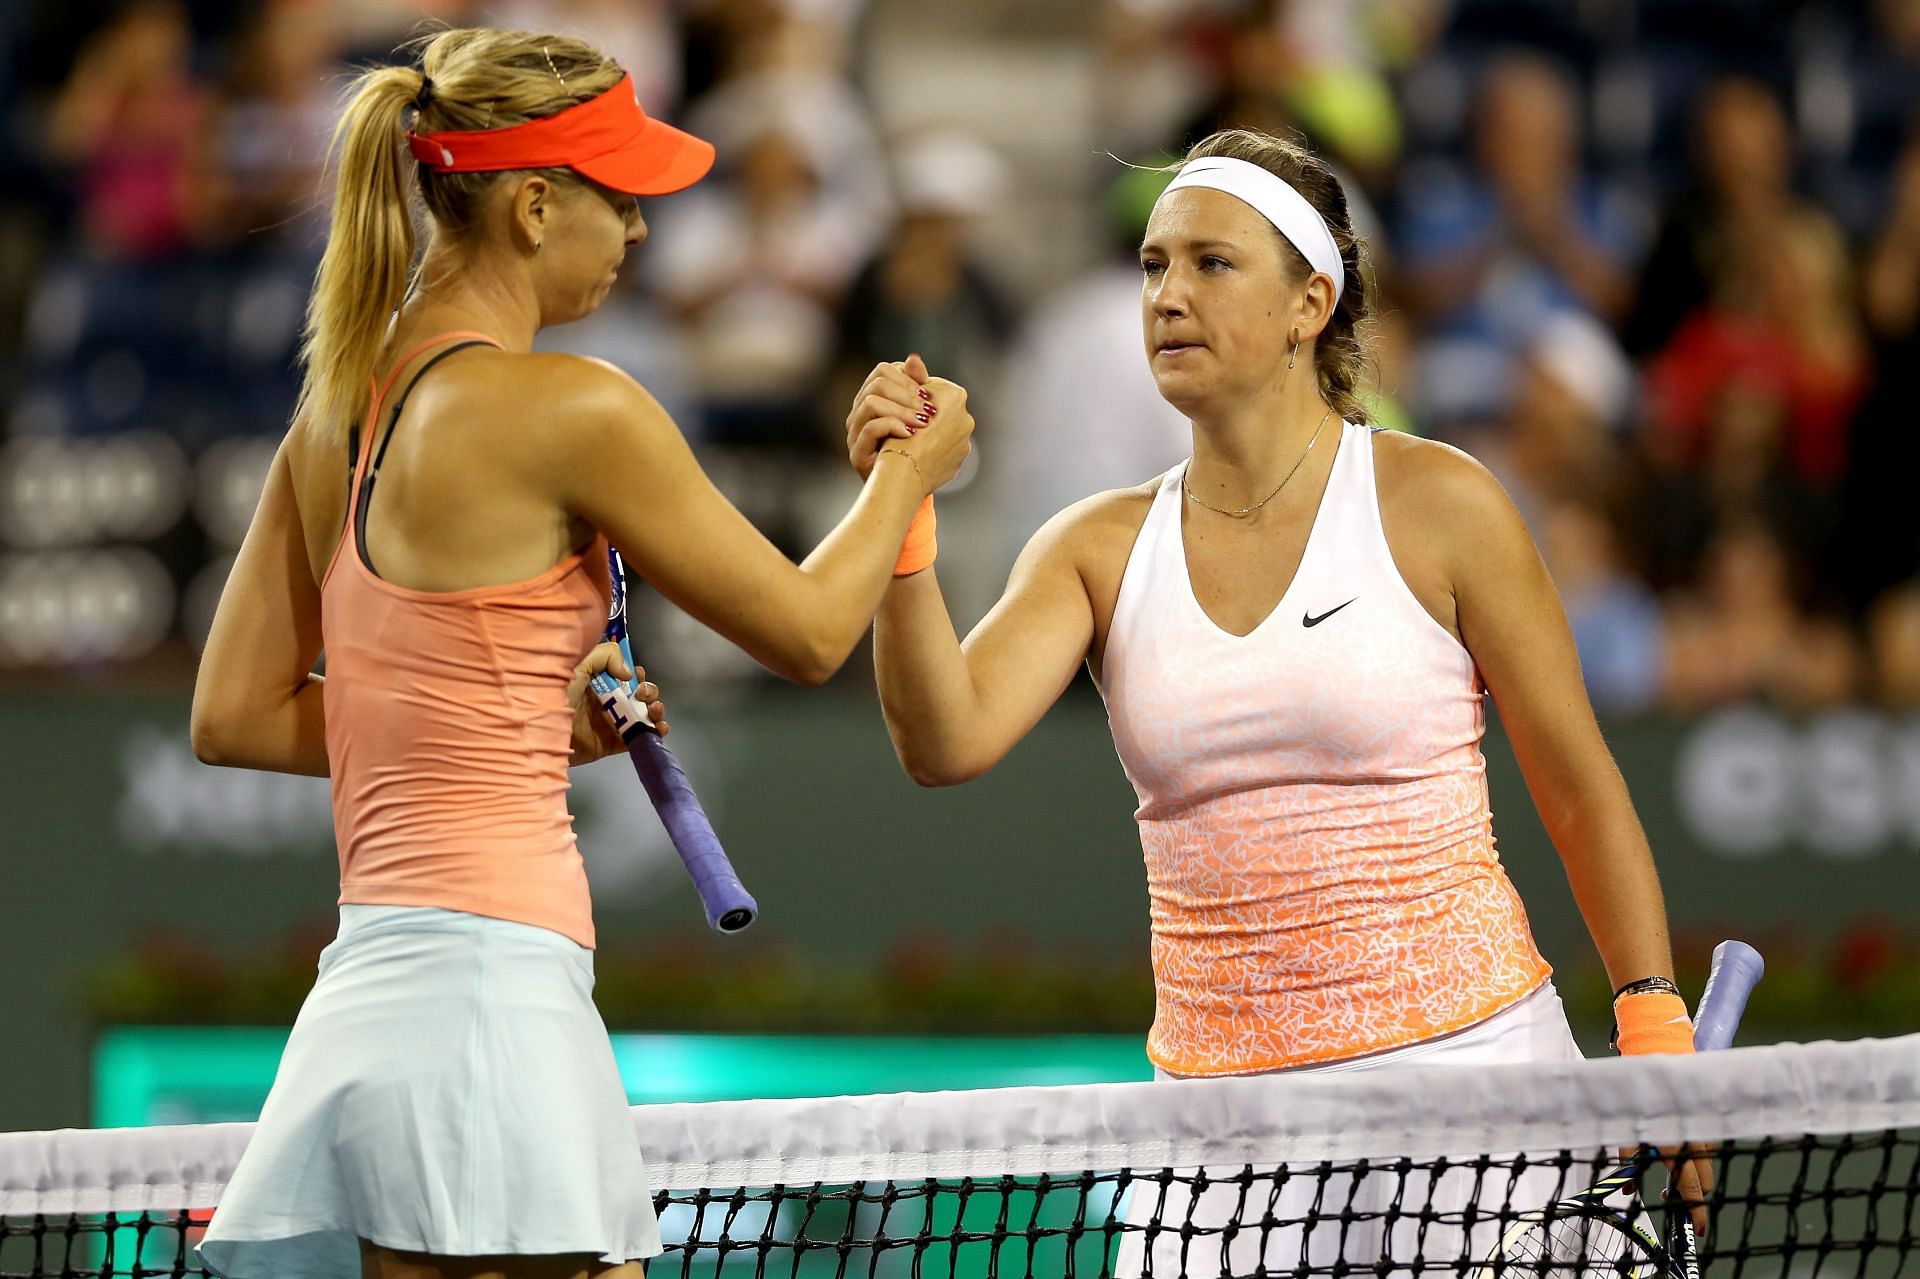 Maria Sharapova and Victoria Azarenka after their match at the 2015 BNP Paribas Open in Indian Wells